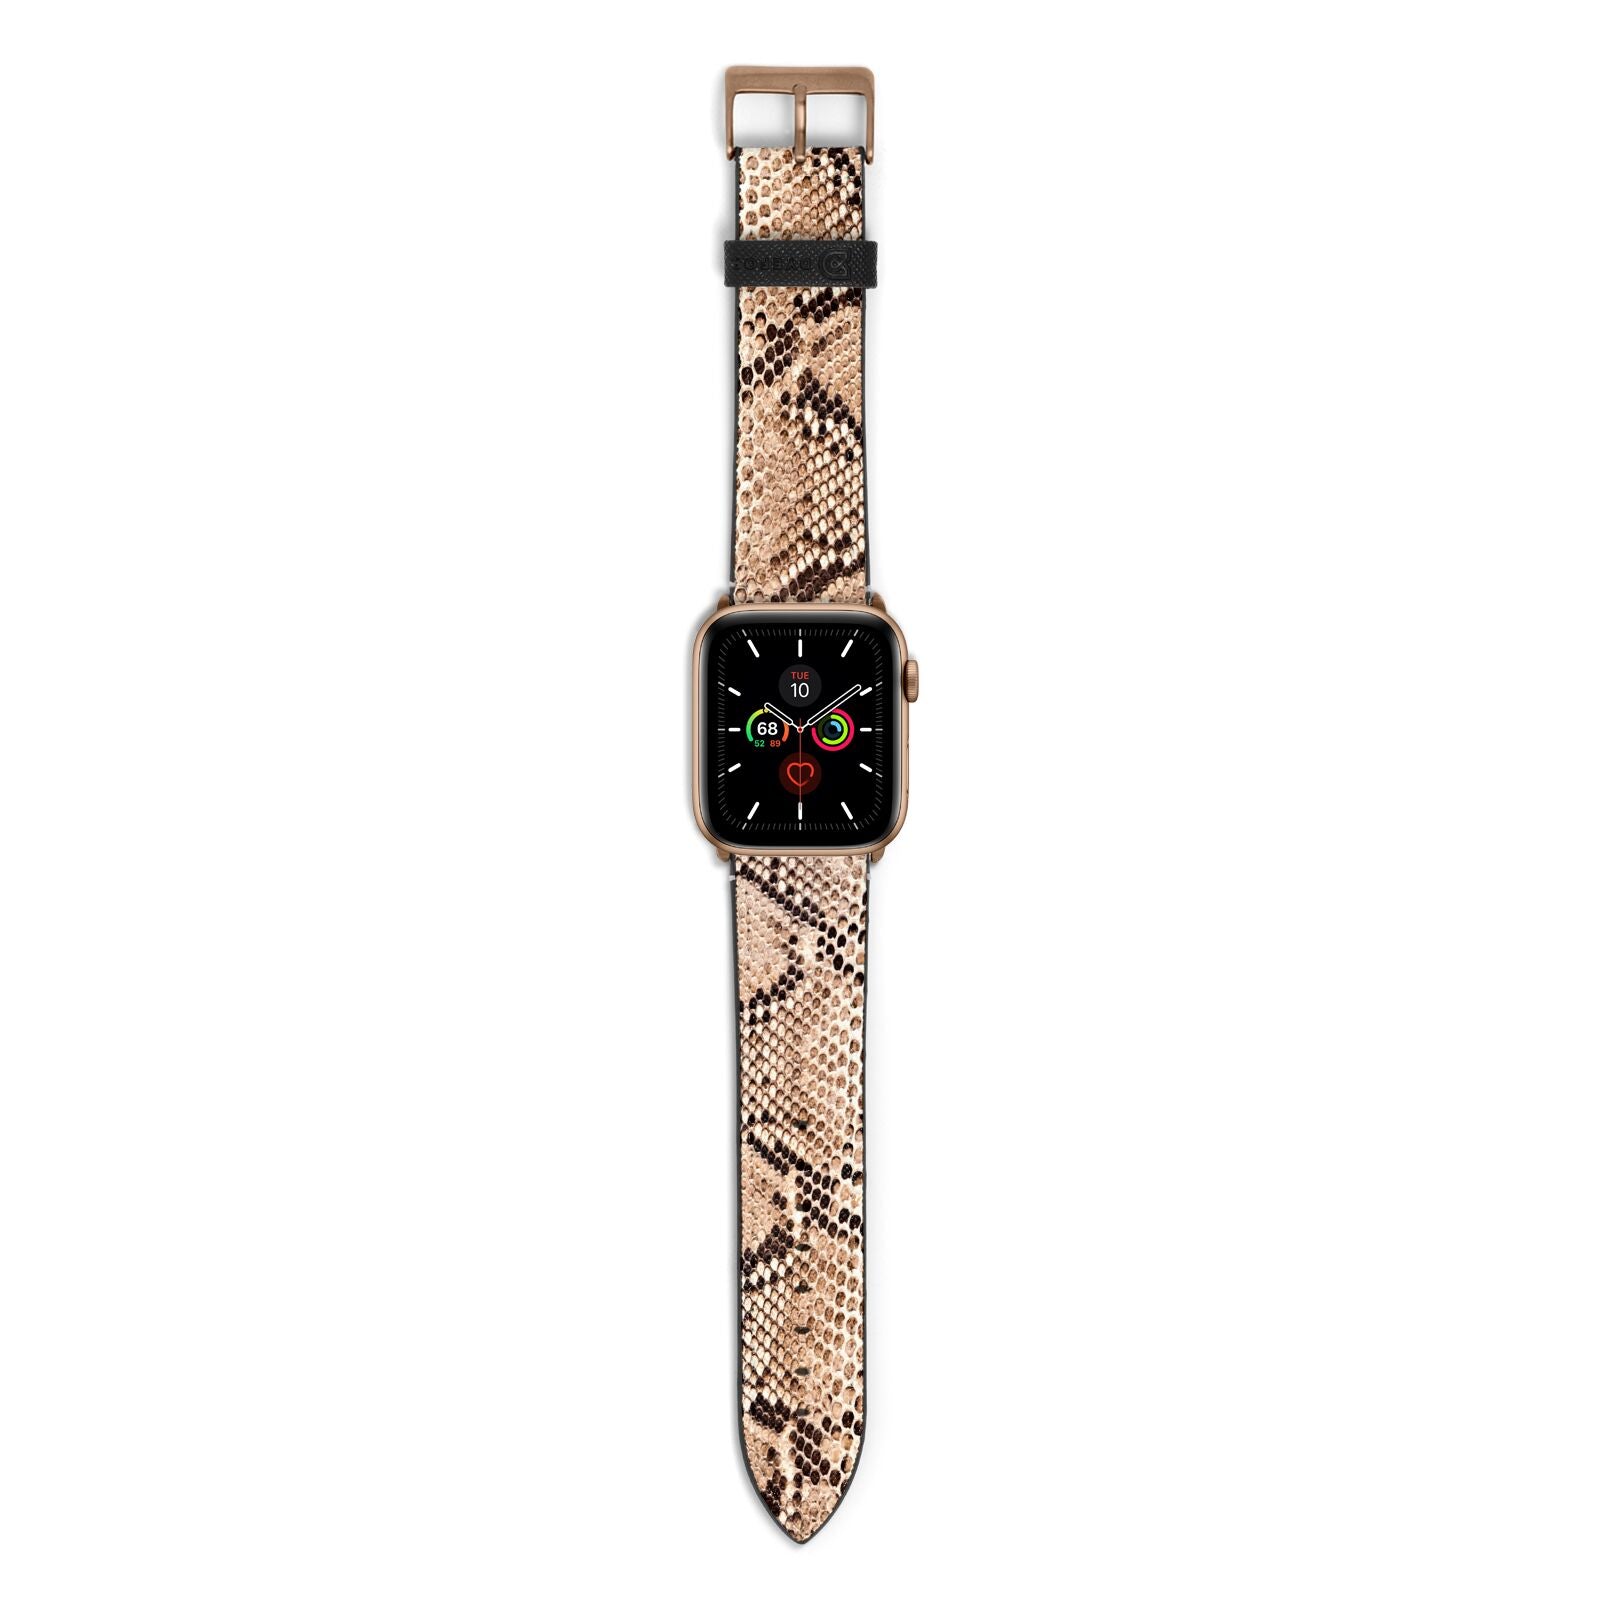 Snakeskin Apple Watch Strap with Gold Hardware